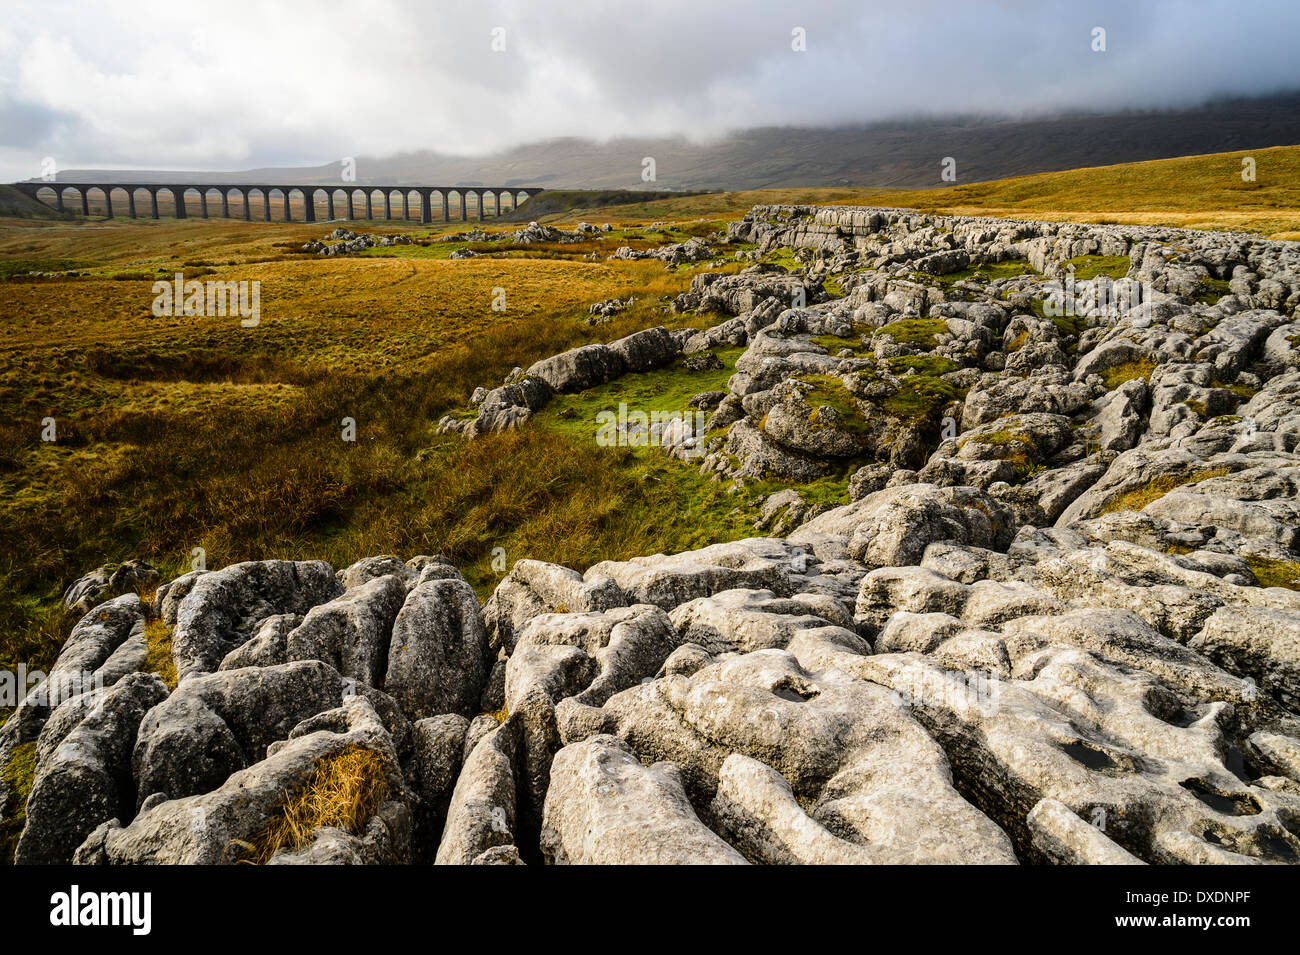 Fissured limestone outcrop at Ribblehead in the Yorkshire Dales with Ribblehead Viaduct behind Stock Photo